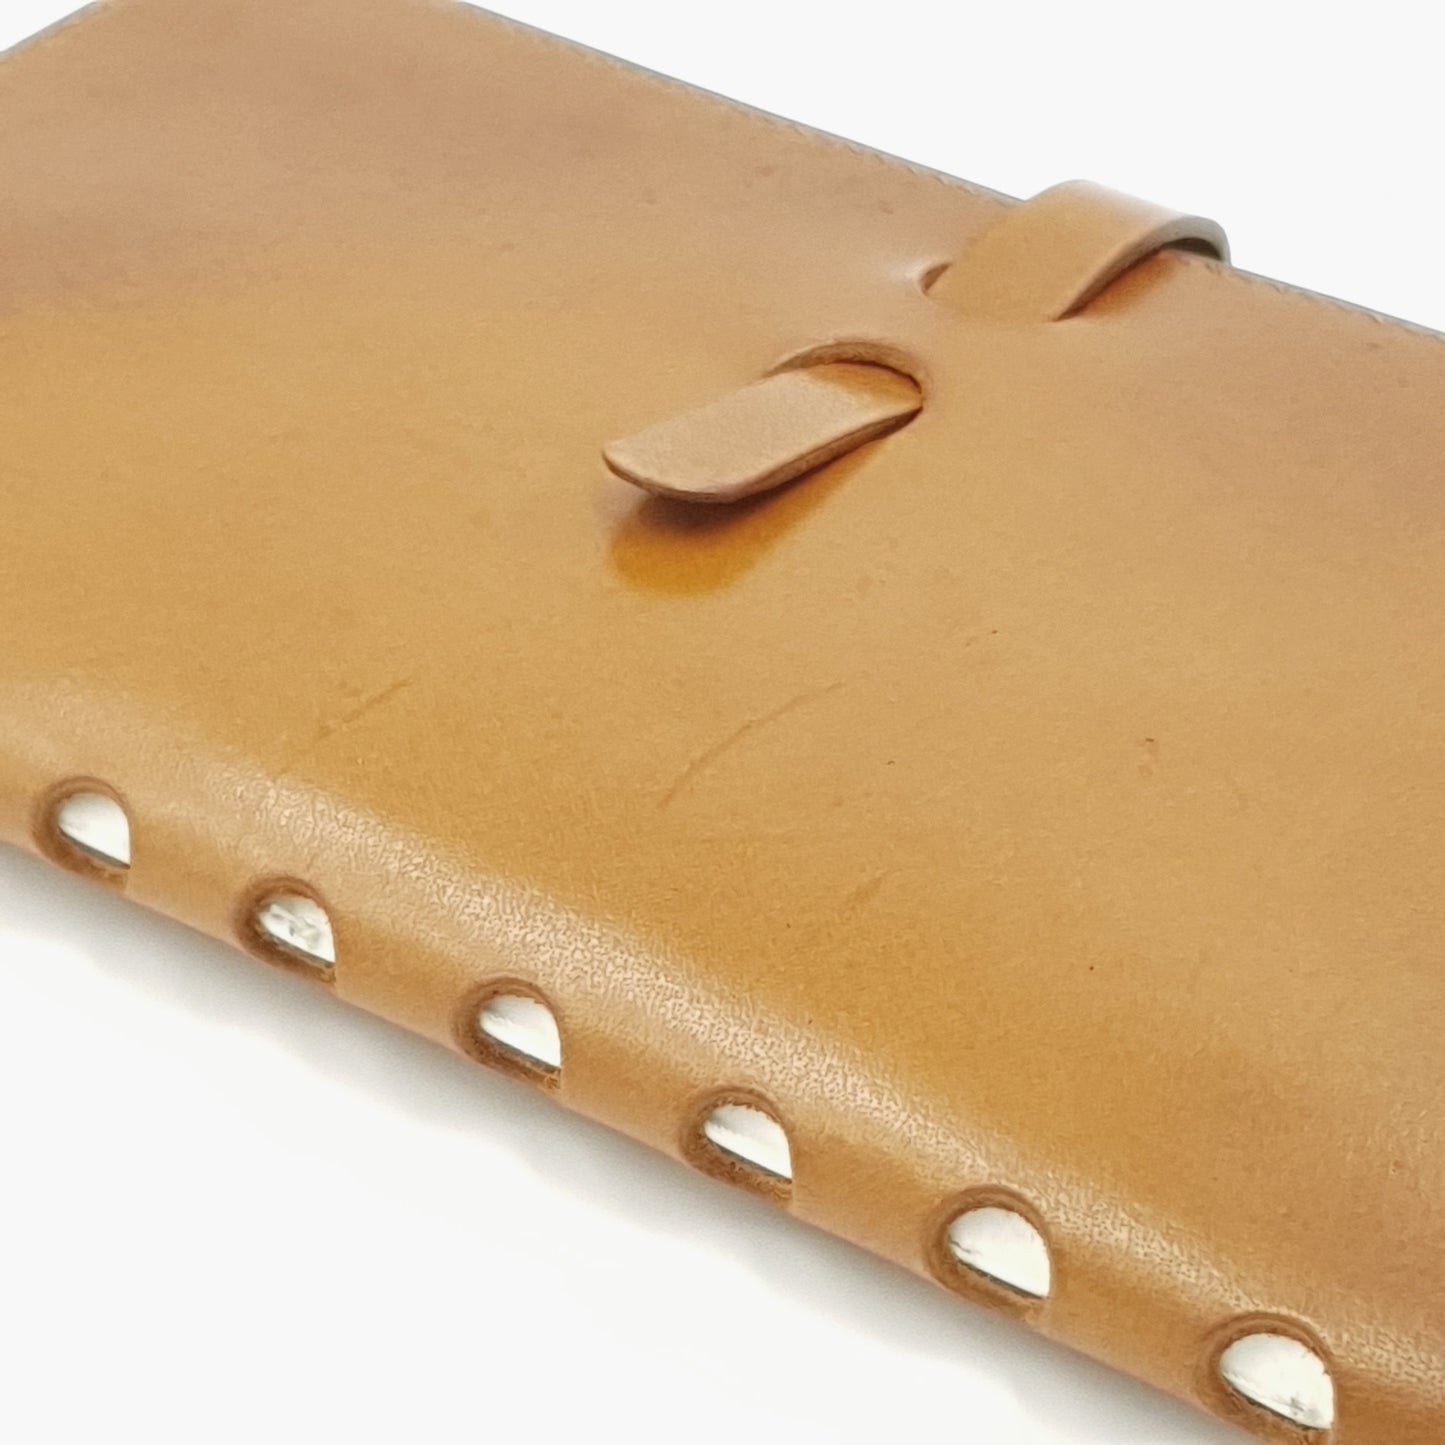 PICCOLO DL Traveller's Notebook Sleeve (Antique Edition)